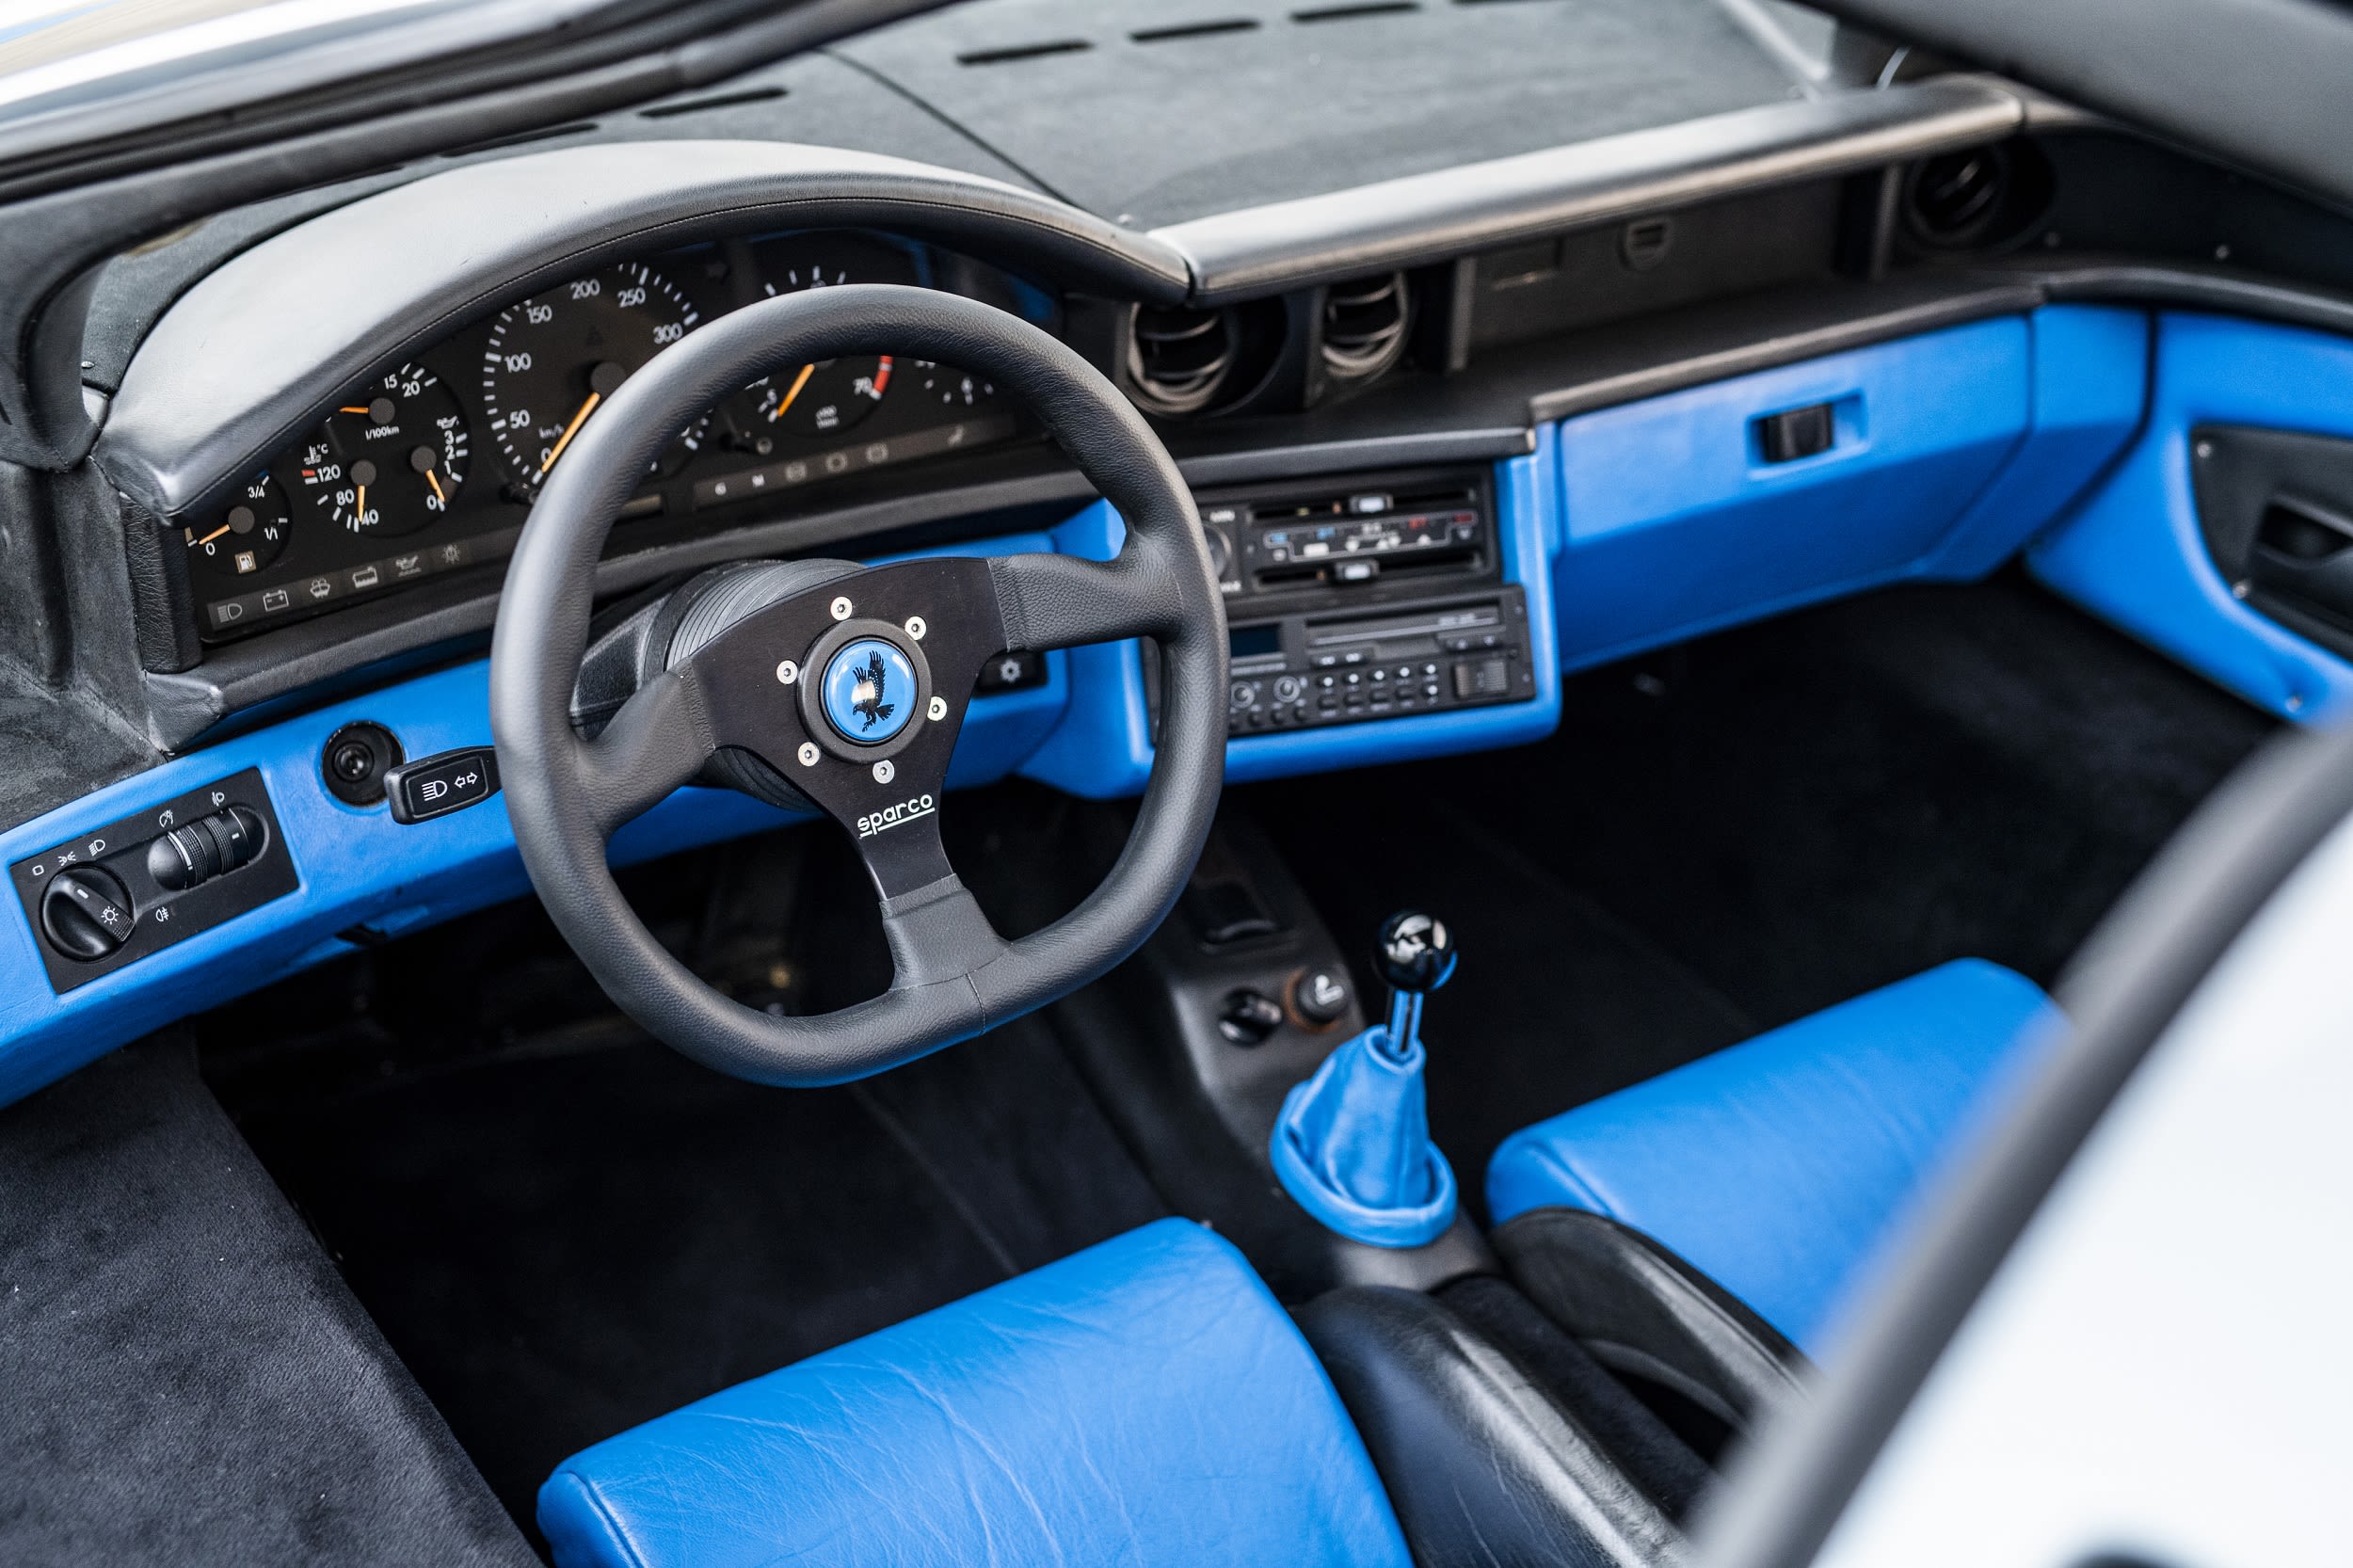 1993 Isdera Commendatore 112i one-off heads to auction